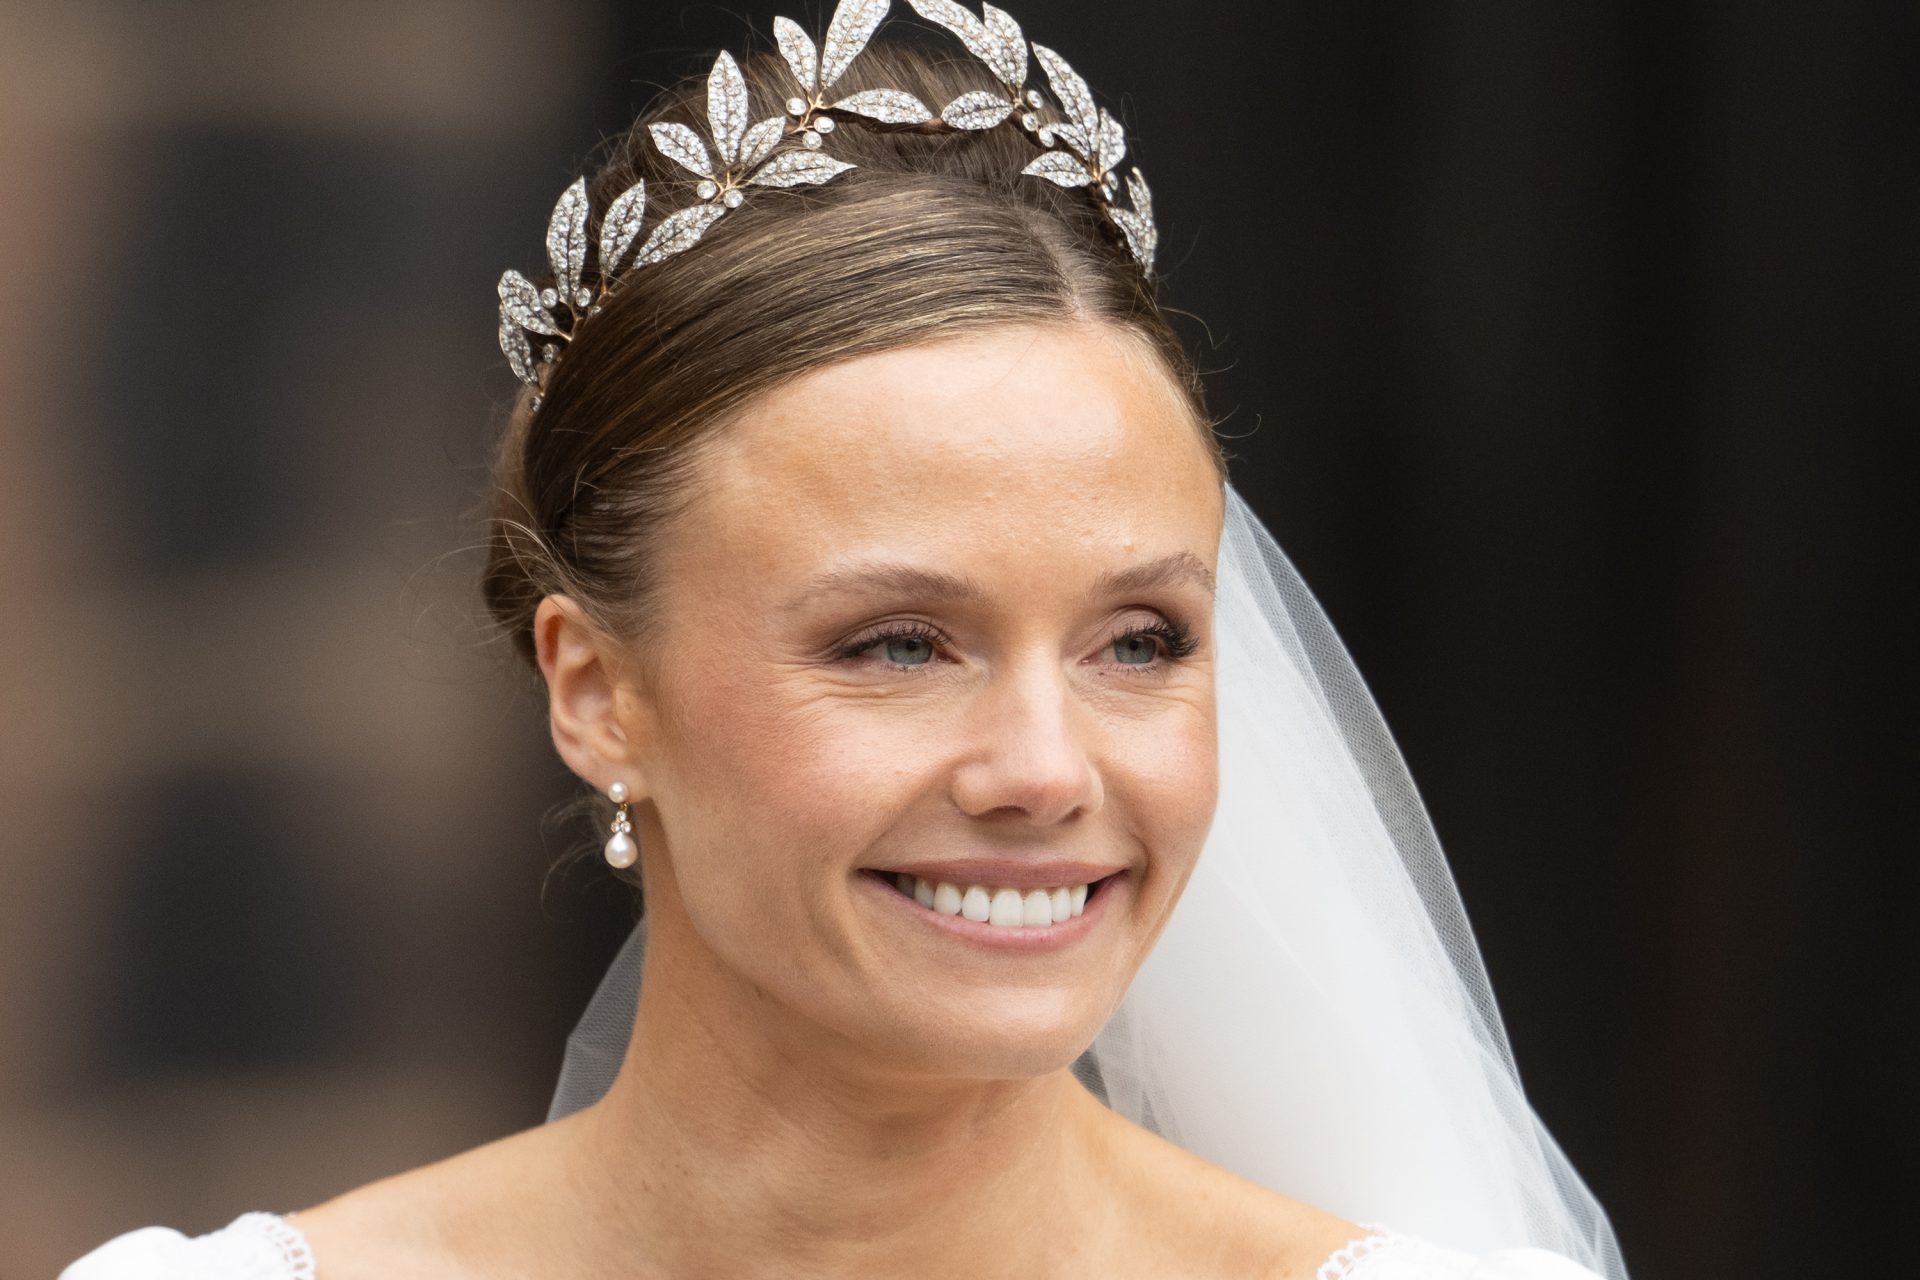 Zooming in on the tiara